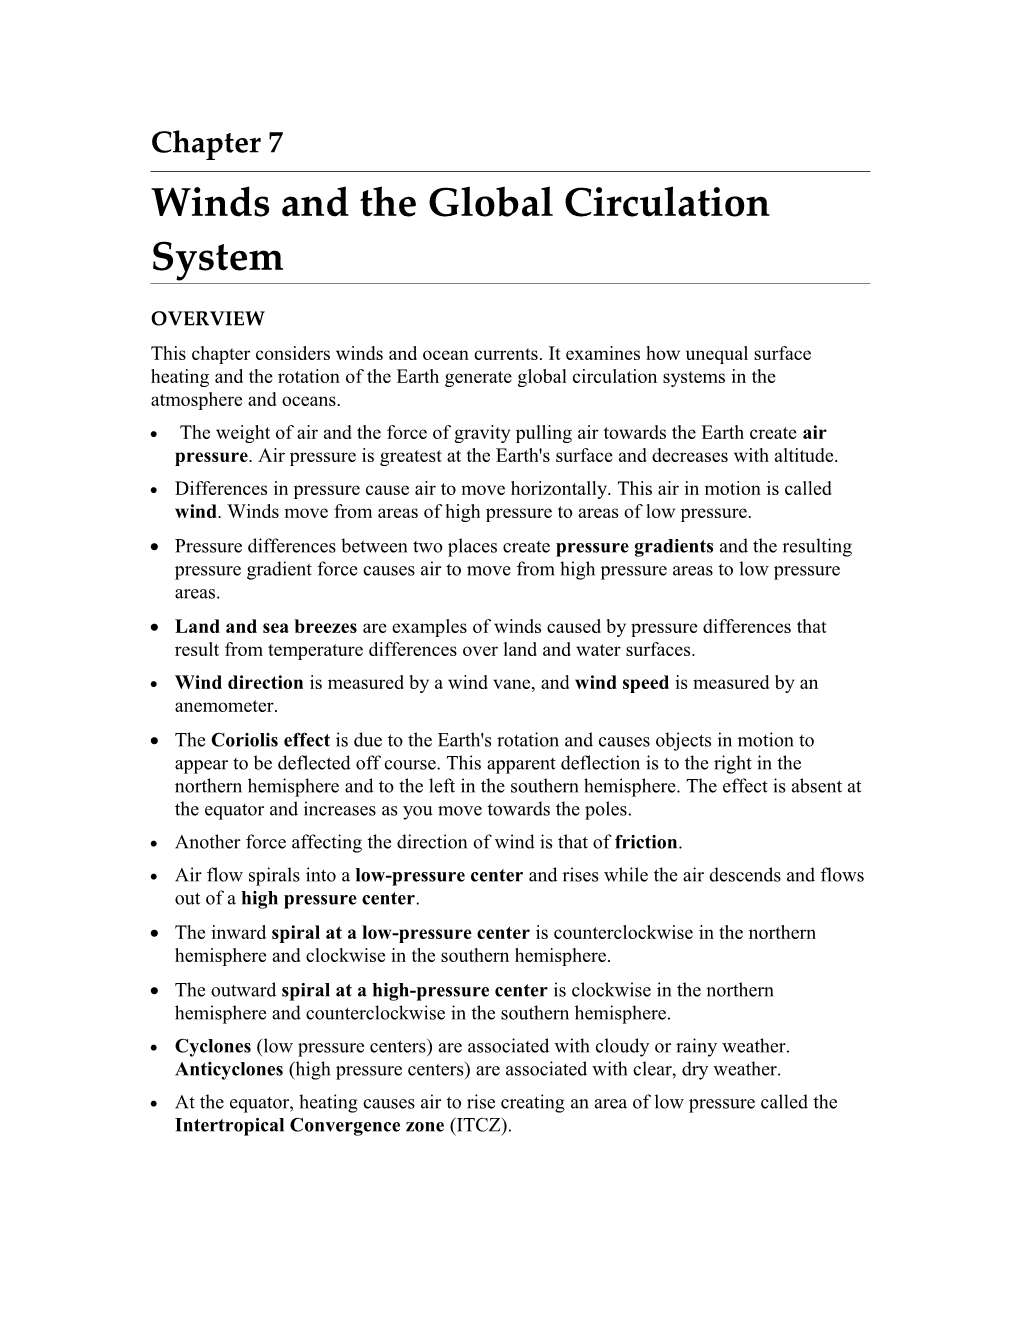 Winds and the Global Circulation System